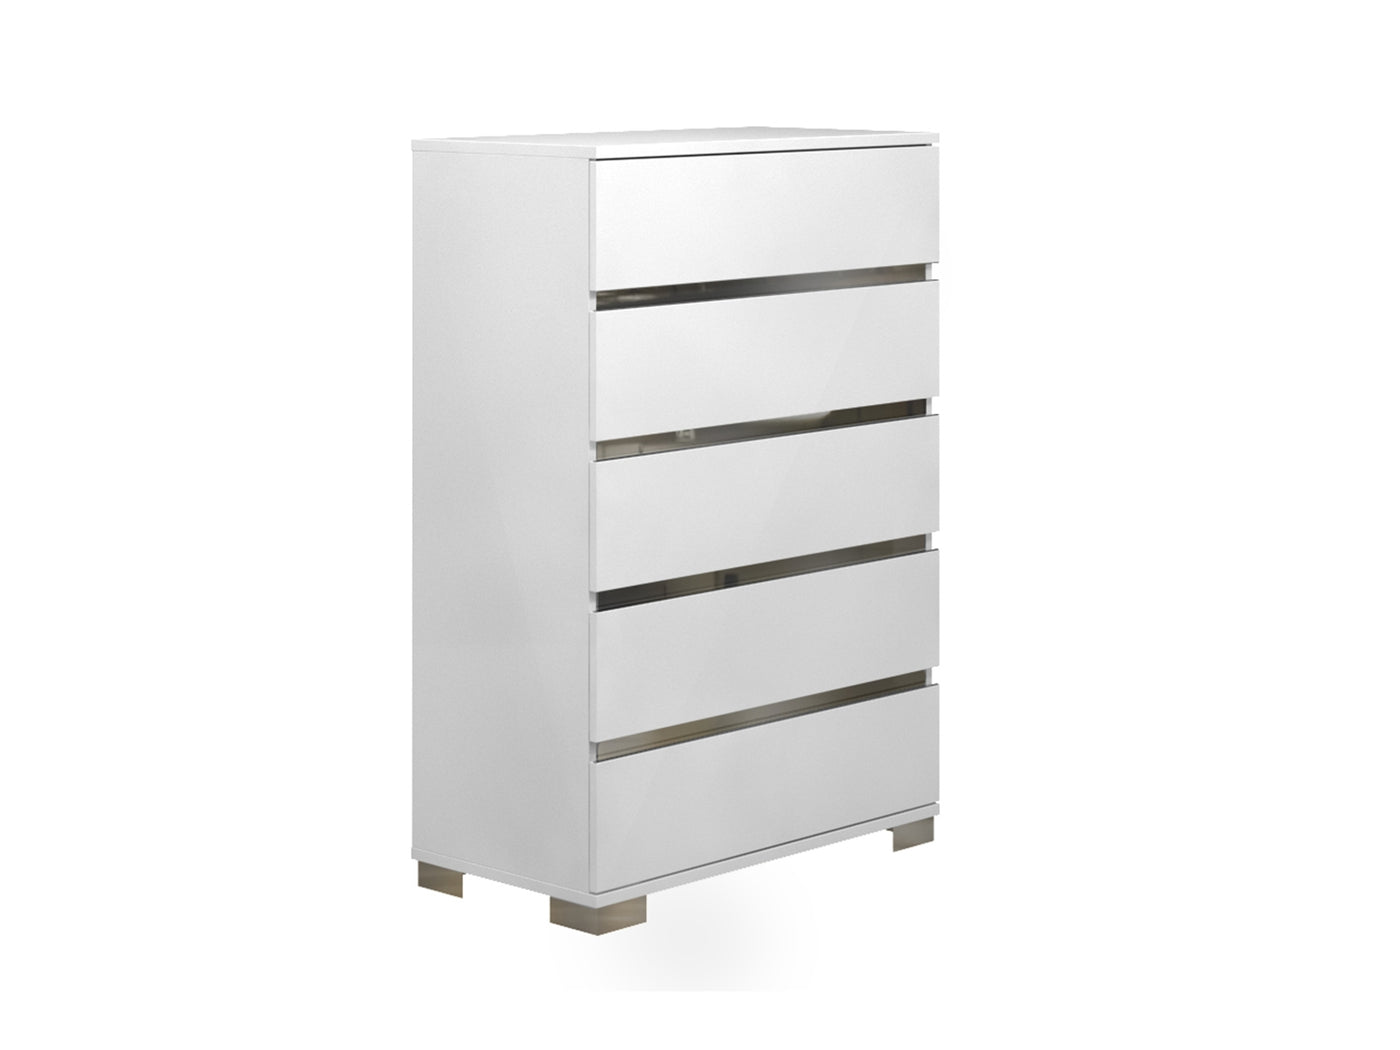 Casabianca Spark High Gloss White Lacquer Stainless Steel